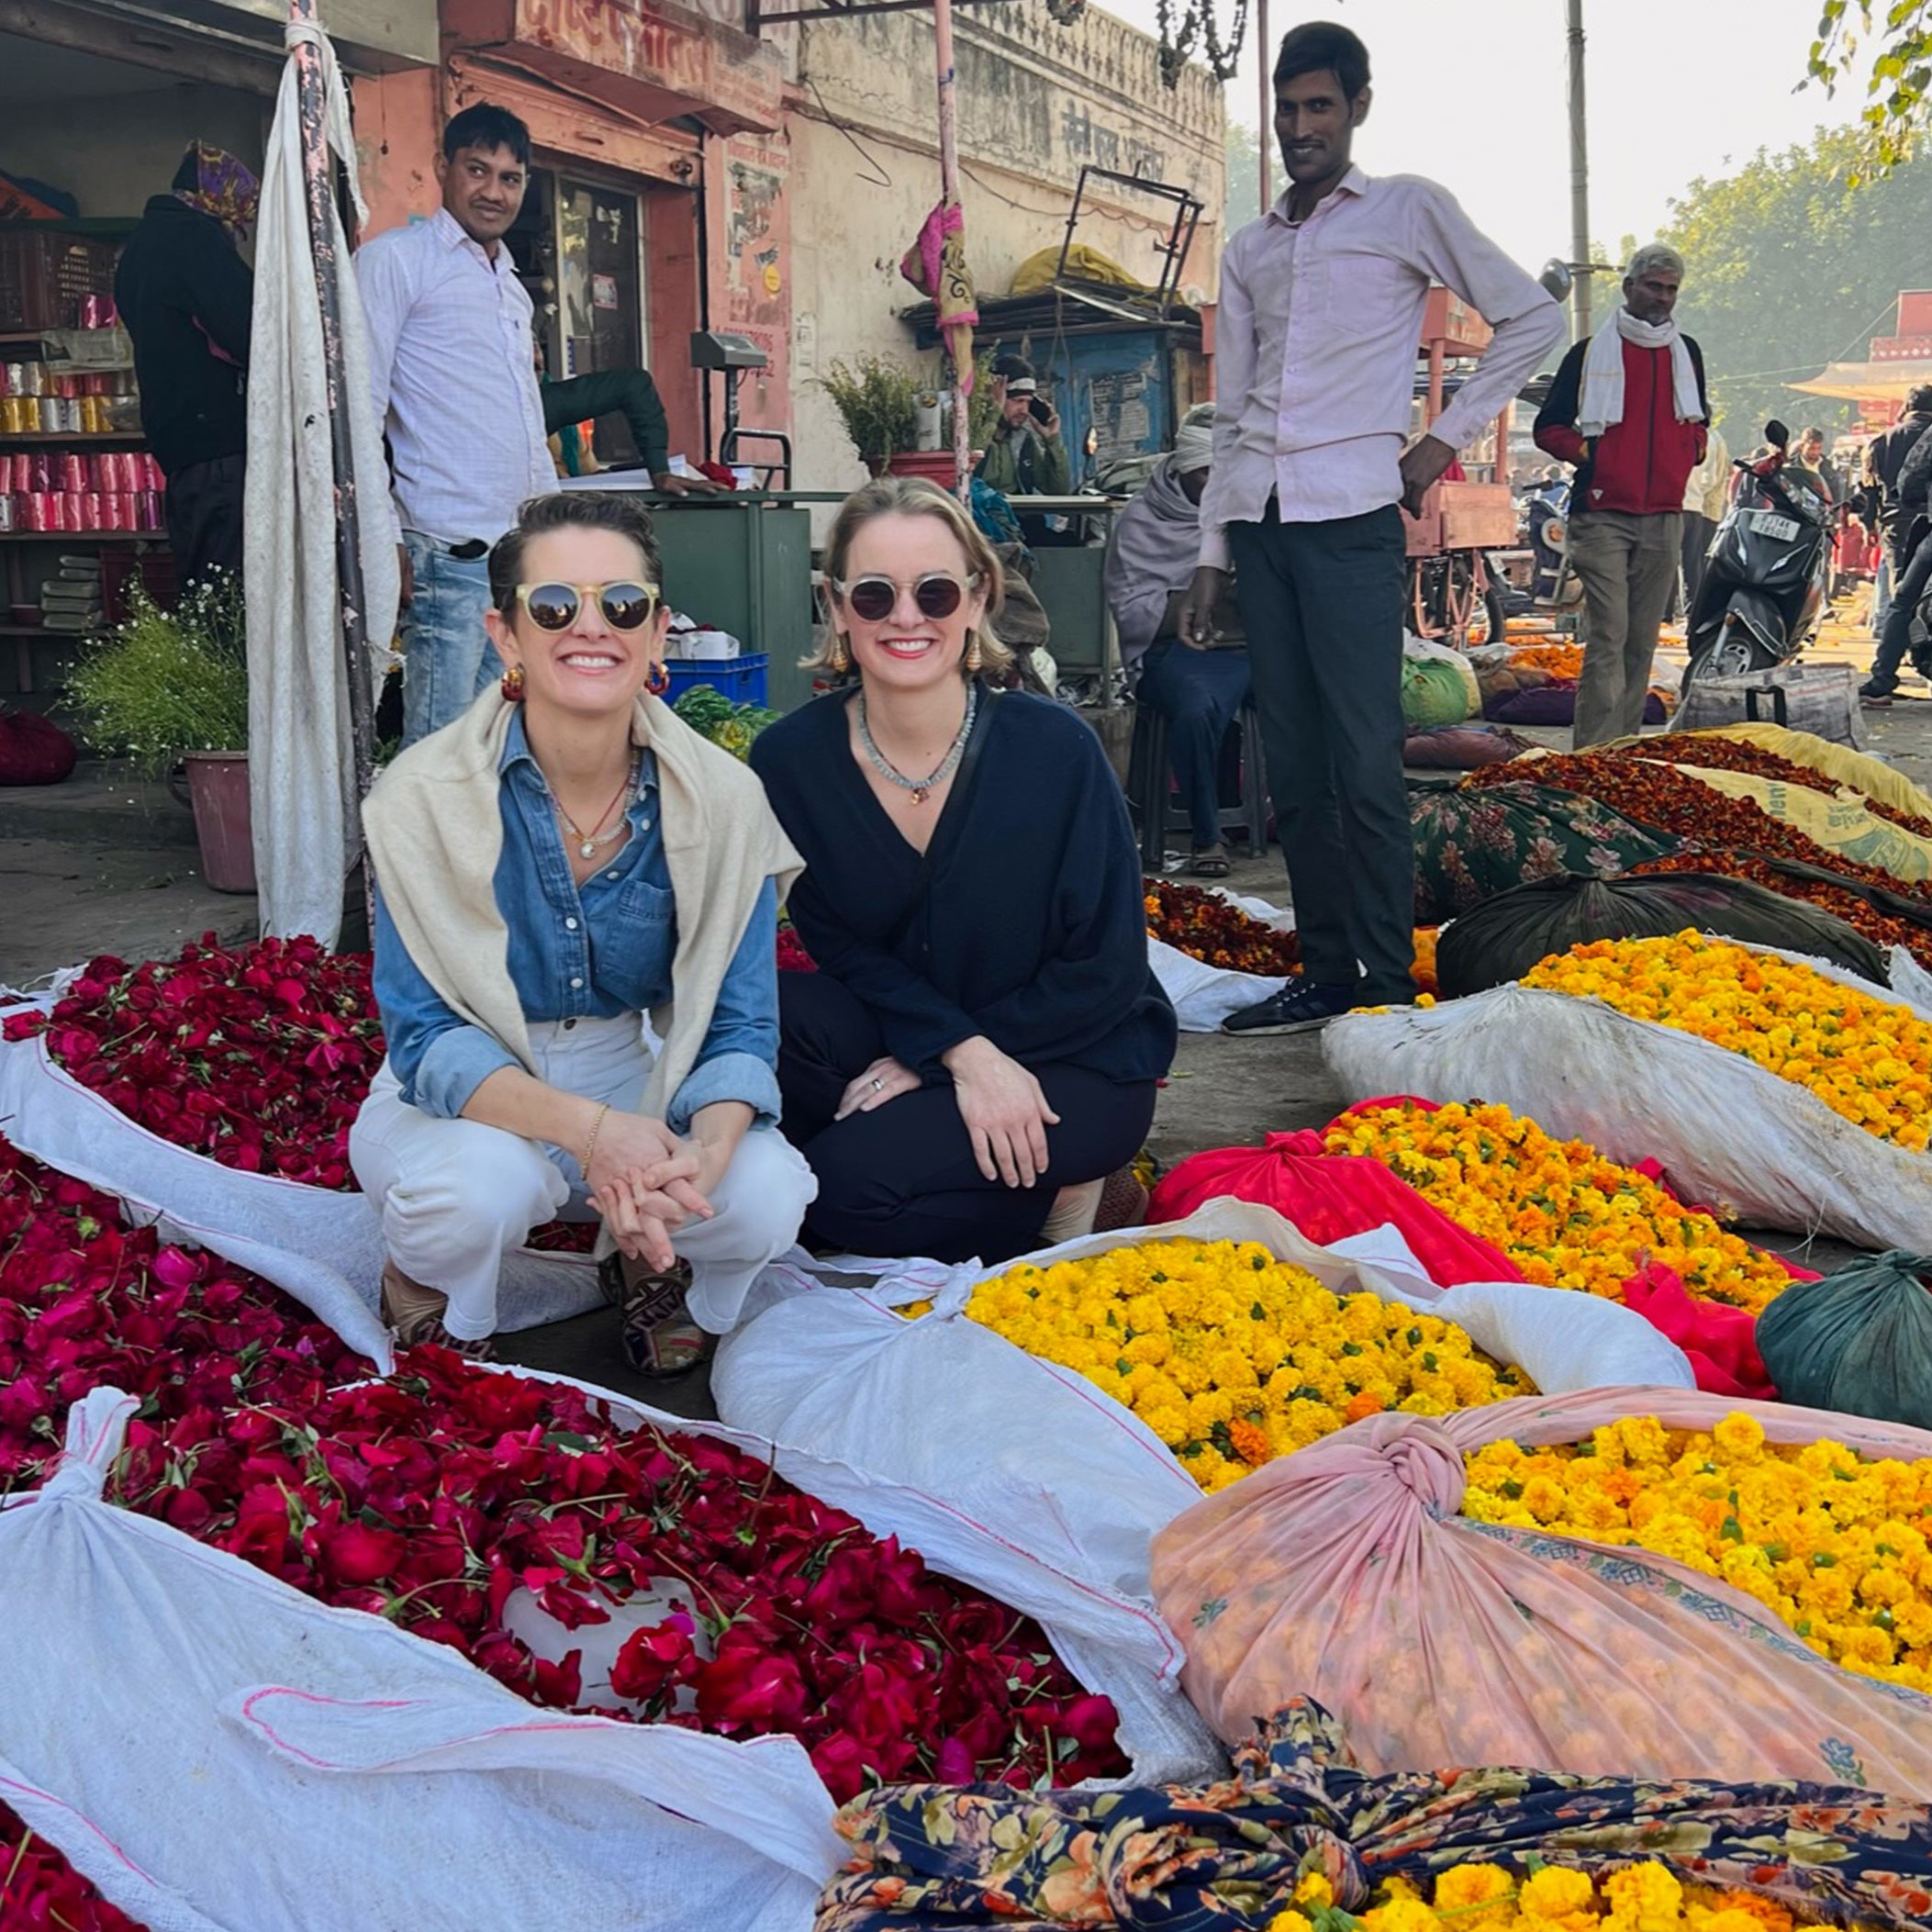 Lizzie and Kathryn pose with bags of colorful flowers at a market in India